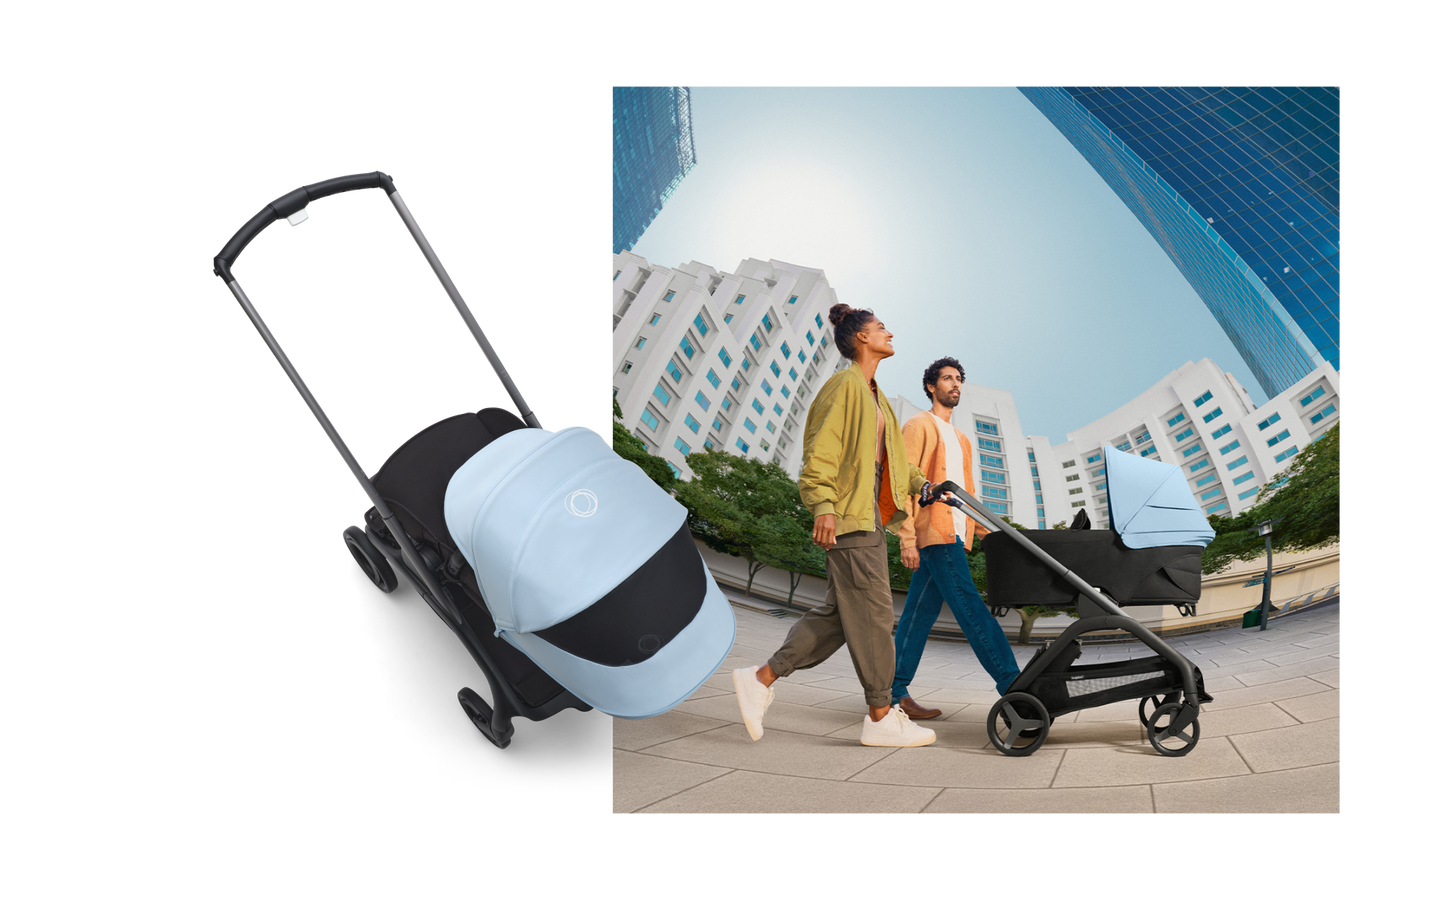 Two overlapping images; one is of parents leisurely strolling through the city with their Bugaboo Dragonfly pram, the other is a top-down view of the Bugaboo Dragonfly.